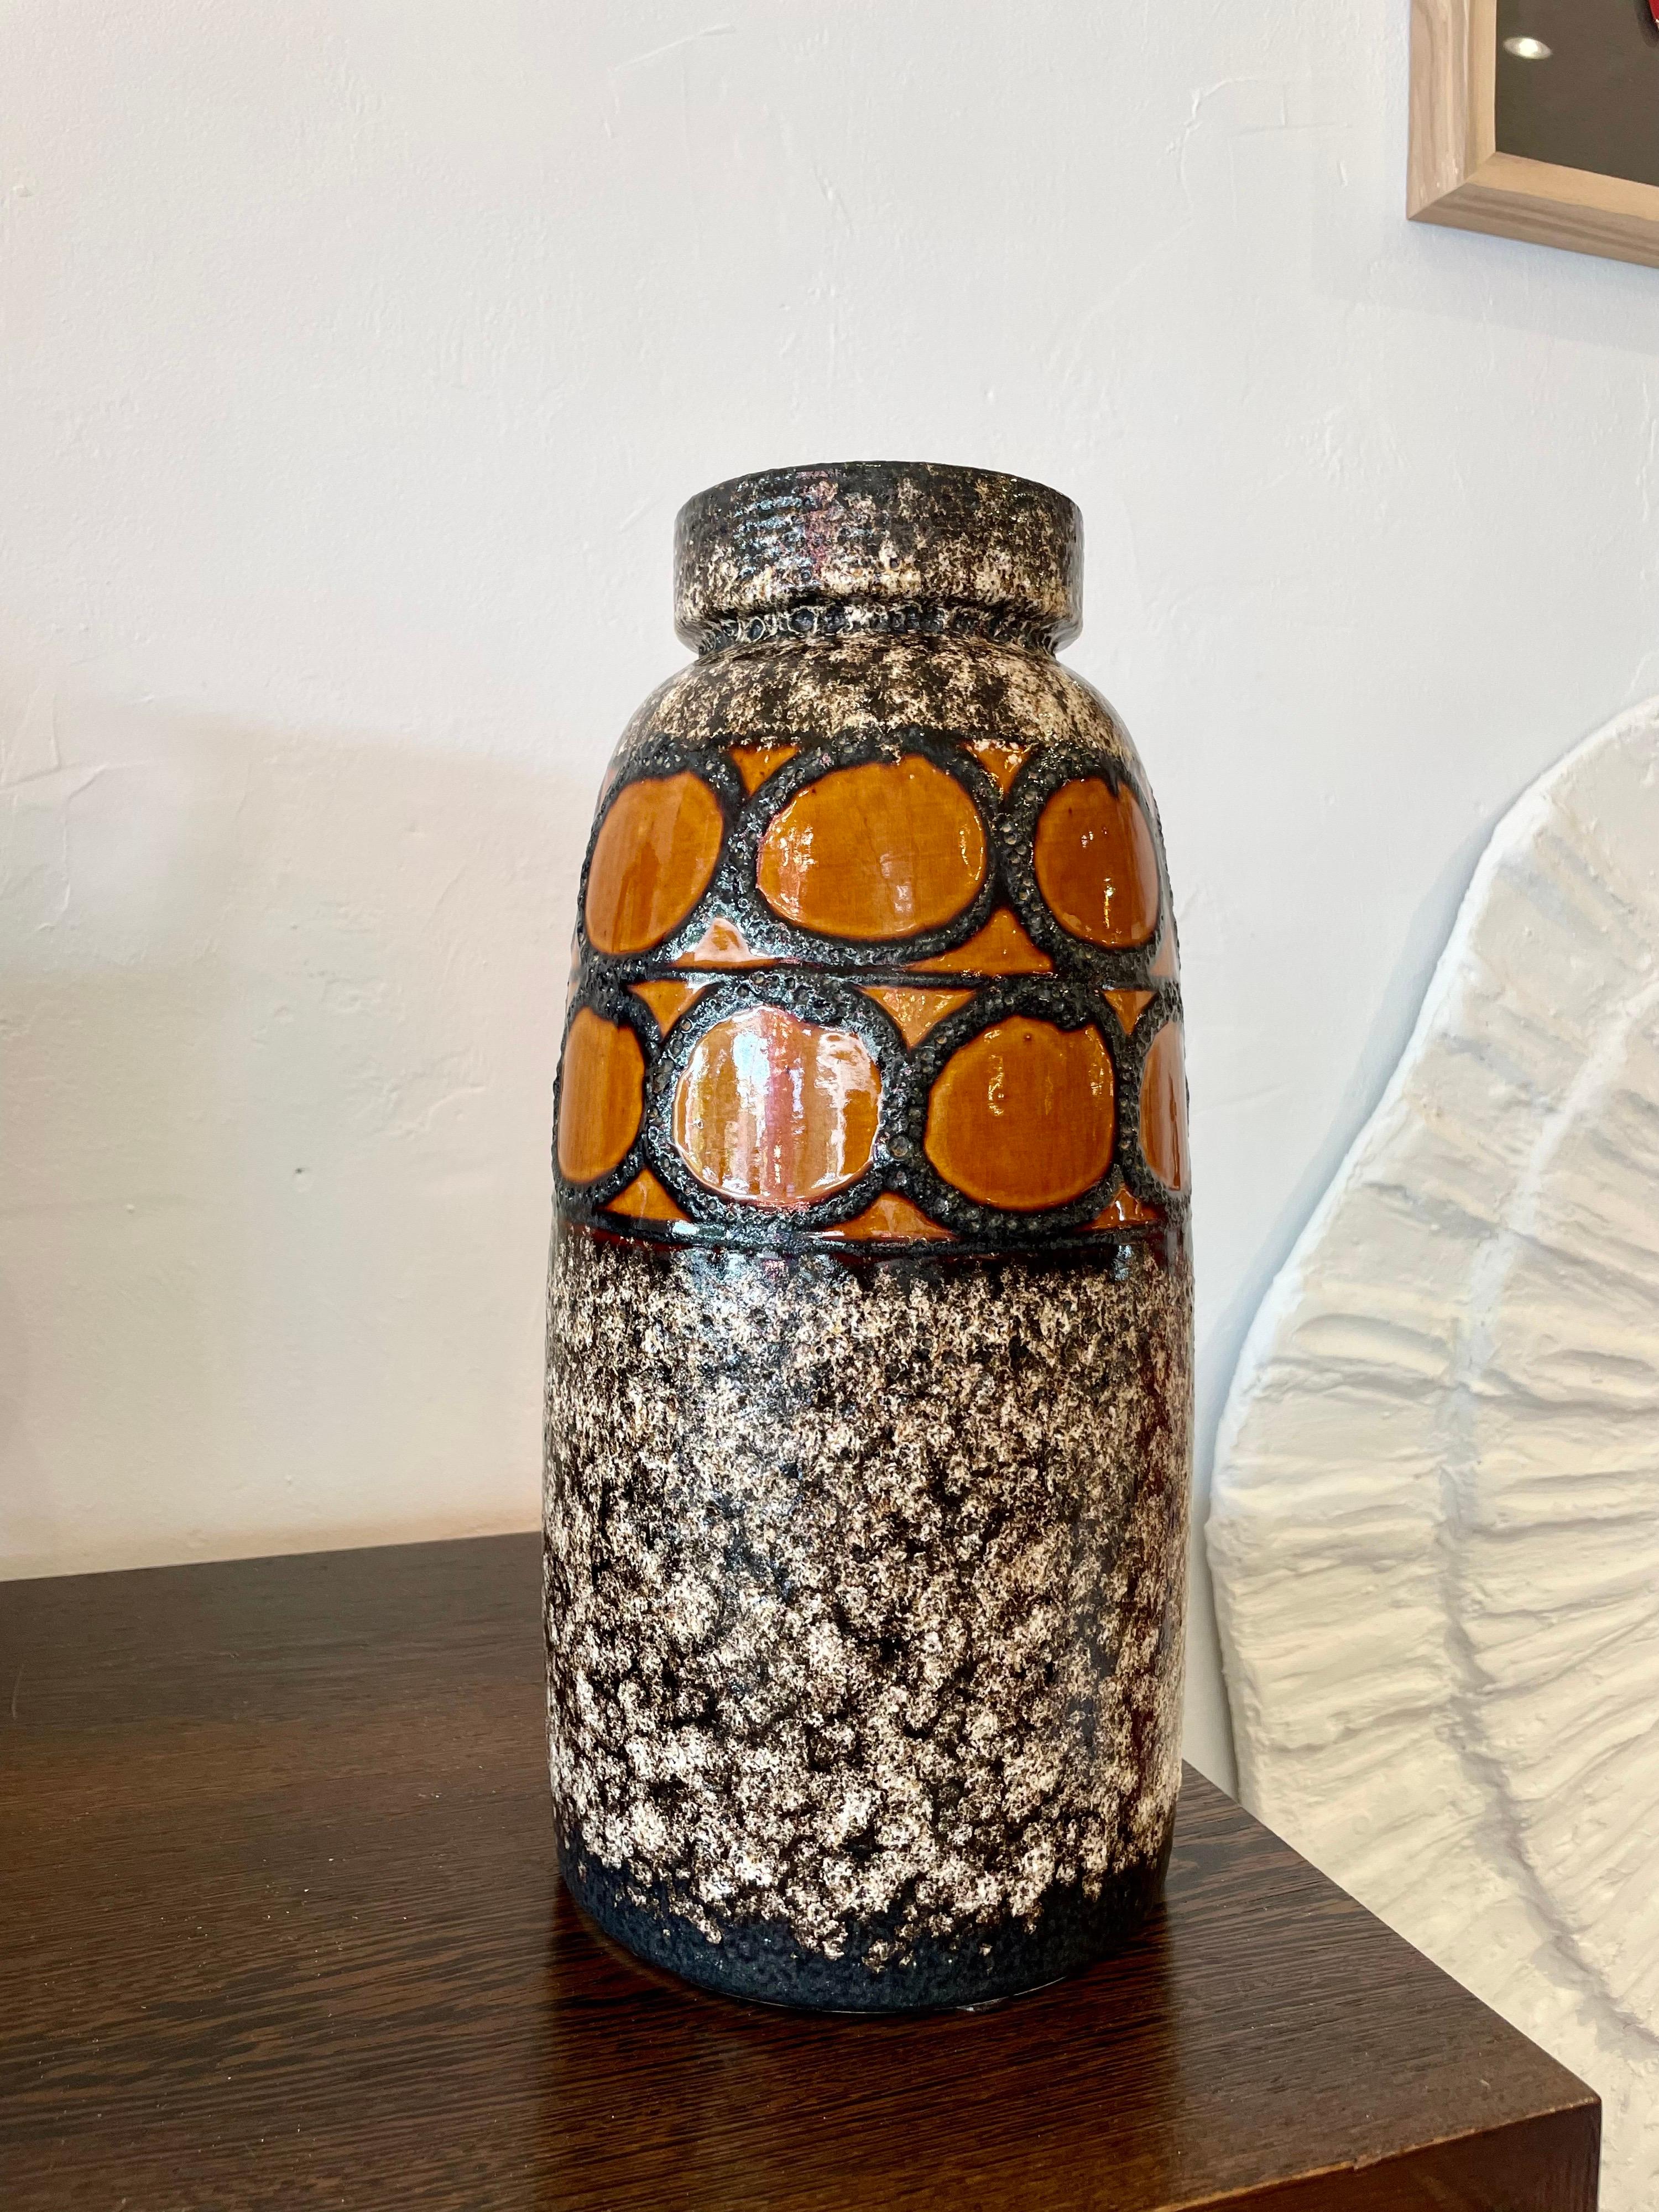 Exceptional texture and coloring, this Fat Lava finish makes this amazing West German pottery vase a rare find.